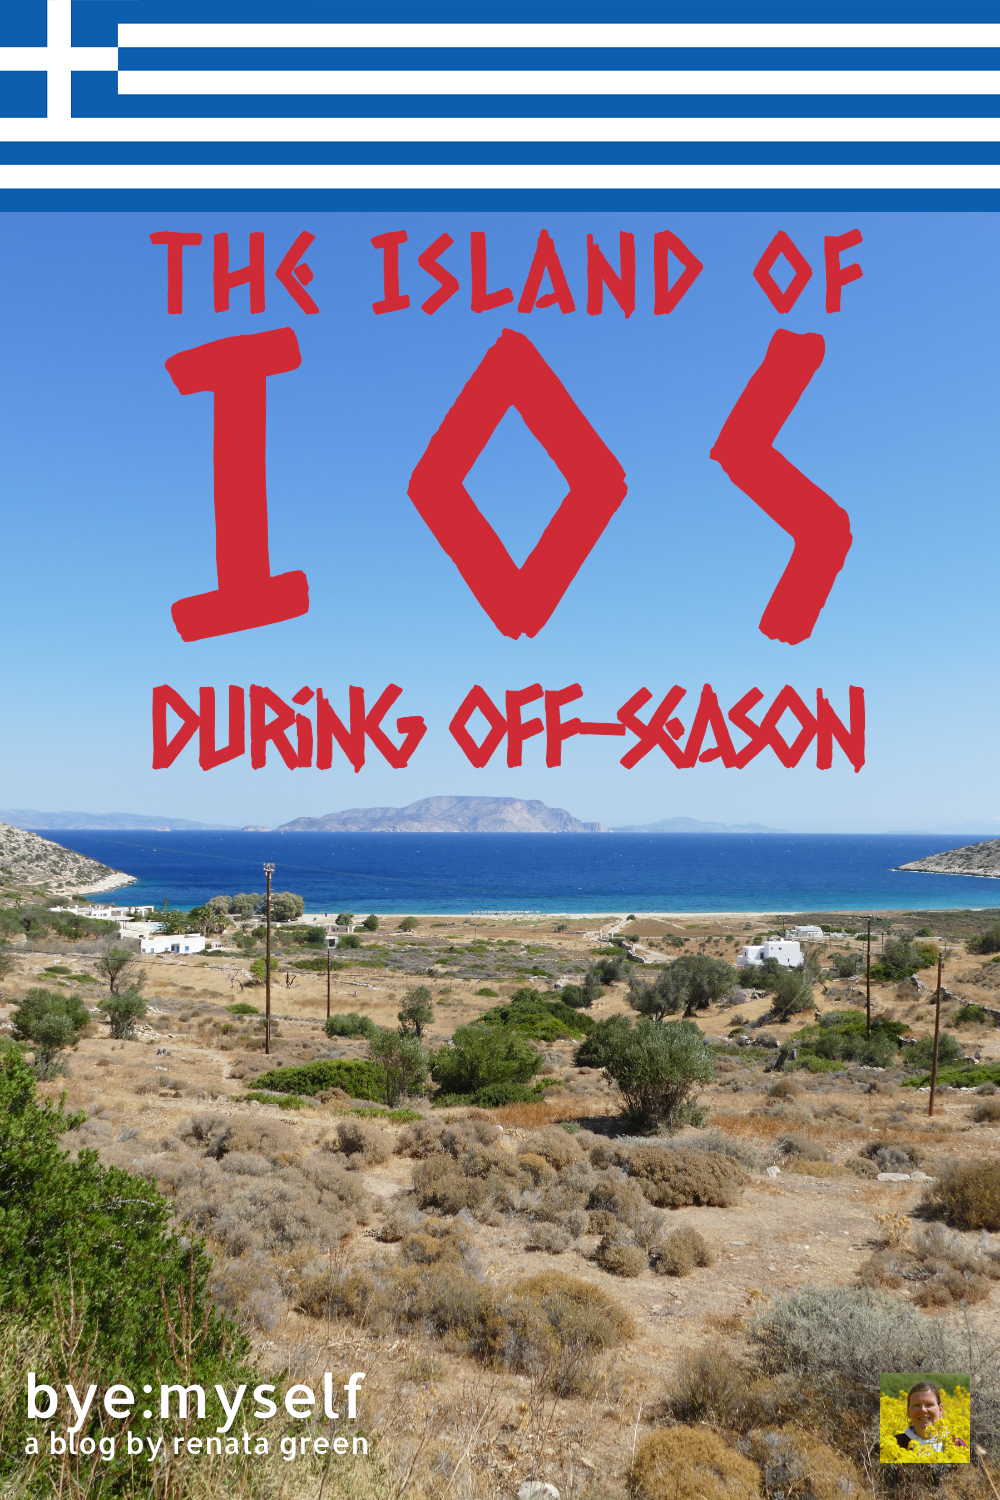 Pinnable Picture for the Post on The Island of IOS During Off-Season